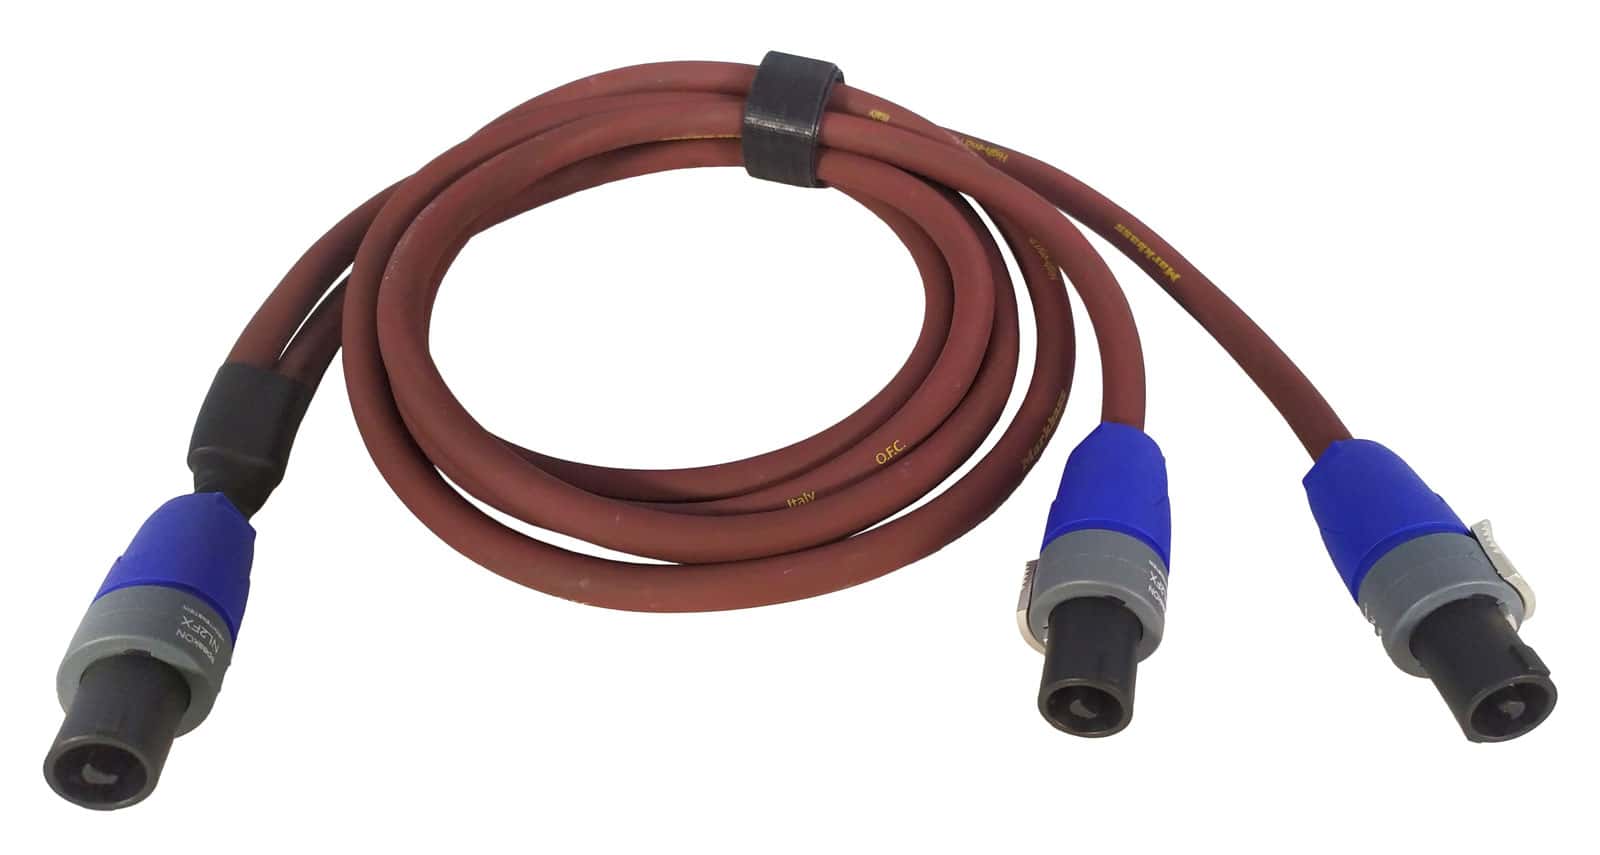 MARKBASS AMS MODULAR CUSTOM CABLE CONNECTION CABLE FOR AMS SPEAKERS